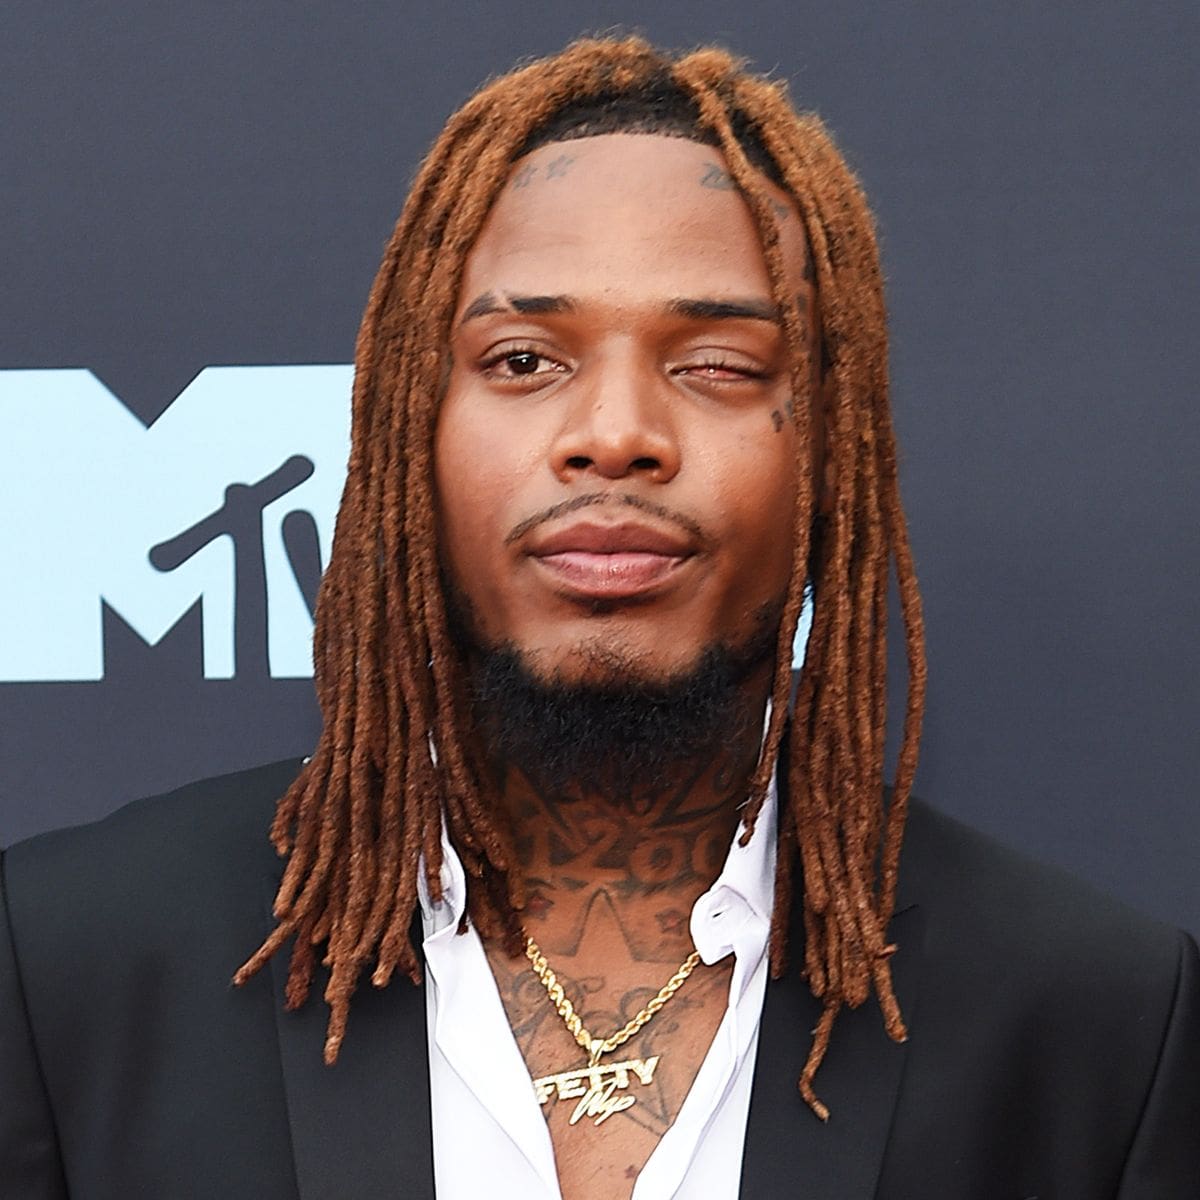 fetty-wap-allegedly-distributed-heroin-cocaine-and-fentanyl